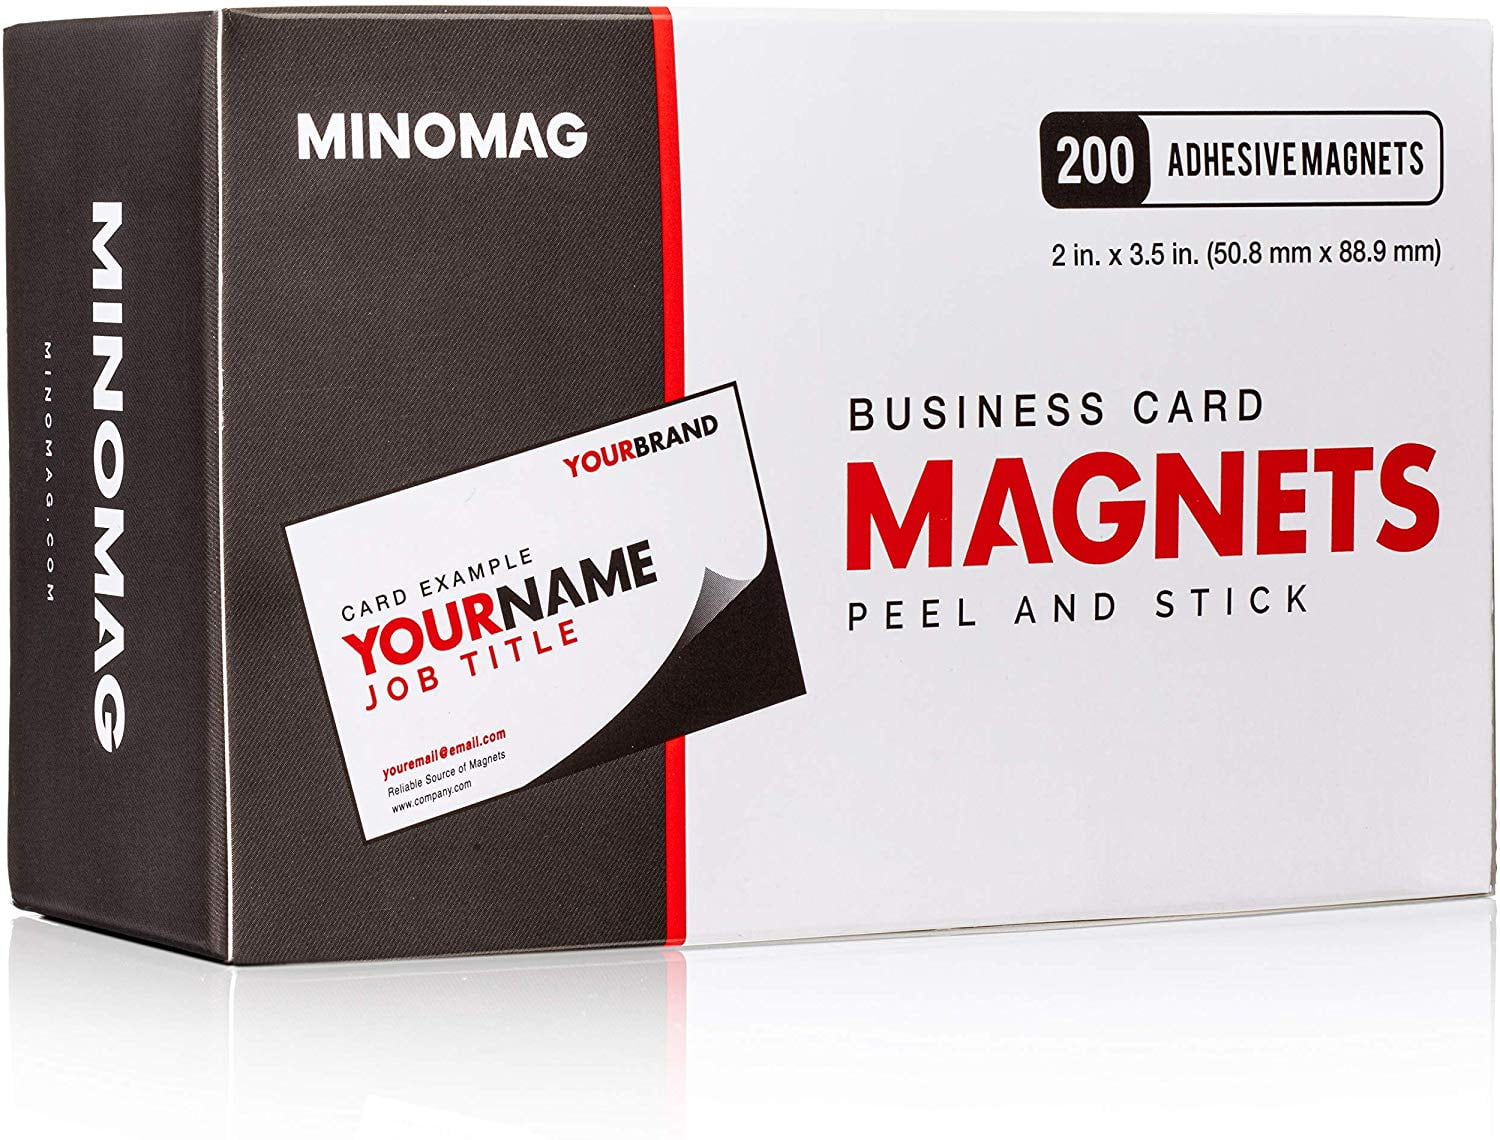 MagFlex® Self-Adhesive Business Card Magnet - 3-3/8 in. Long x 2 in. Wide